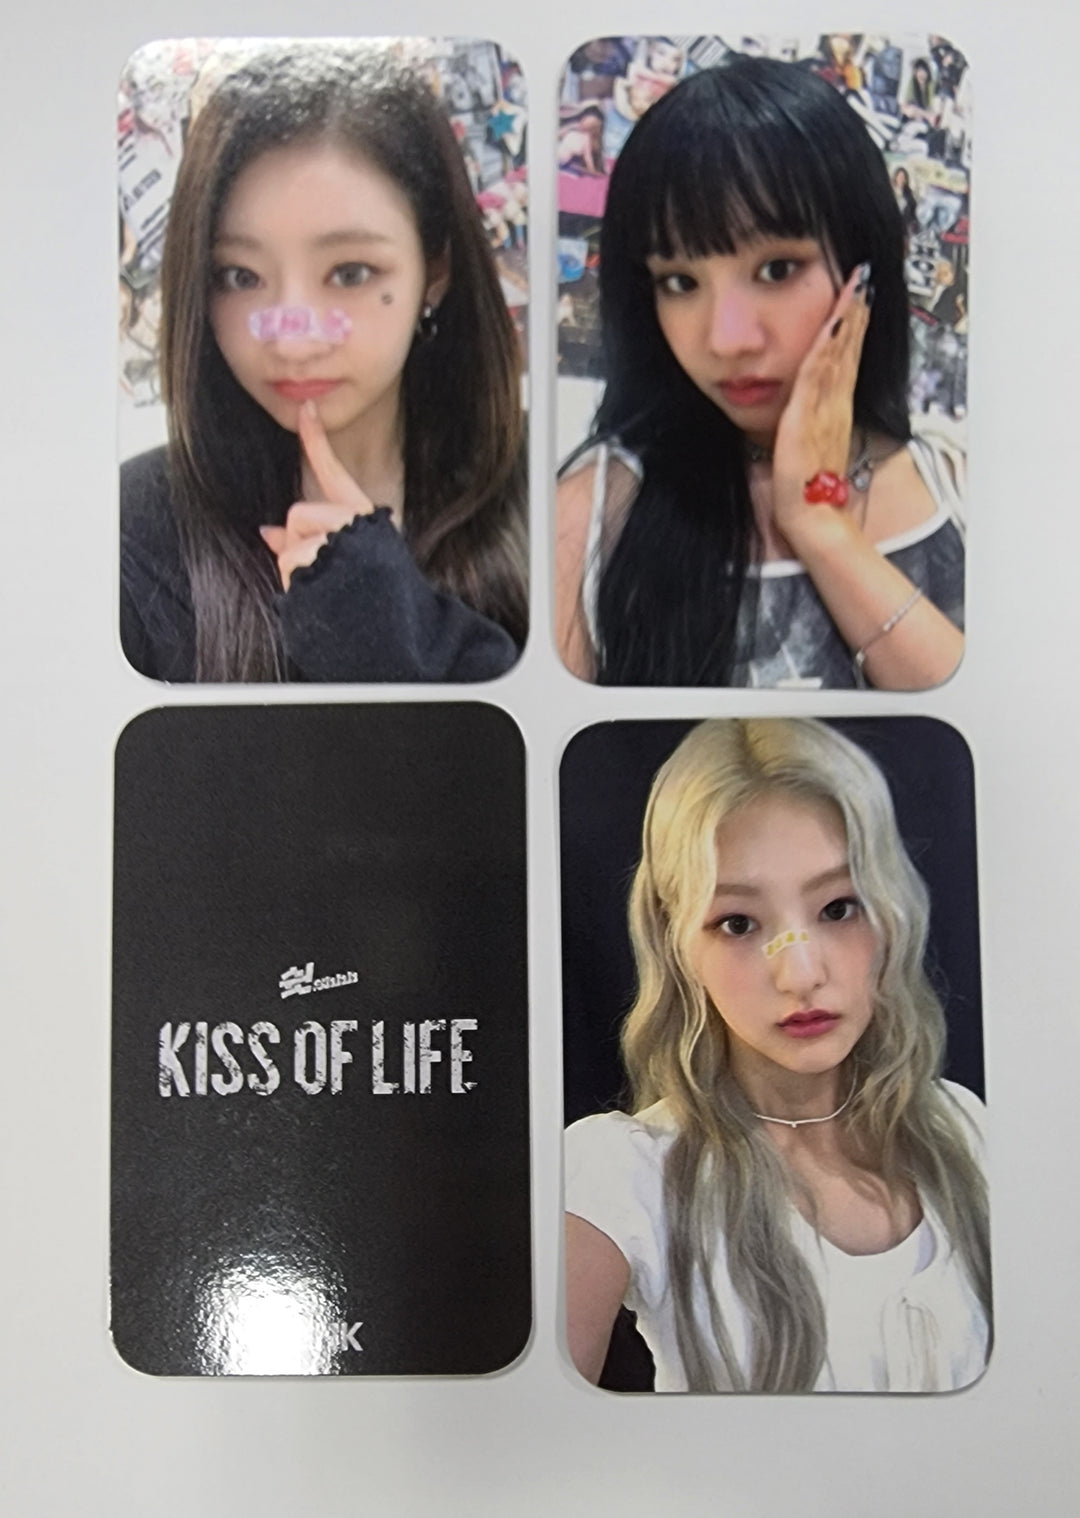 KISS OF LIFE "KISS OF LIFE" - FLNK Fansign Event Photocard